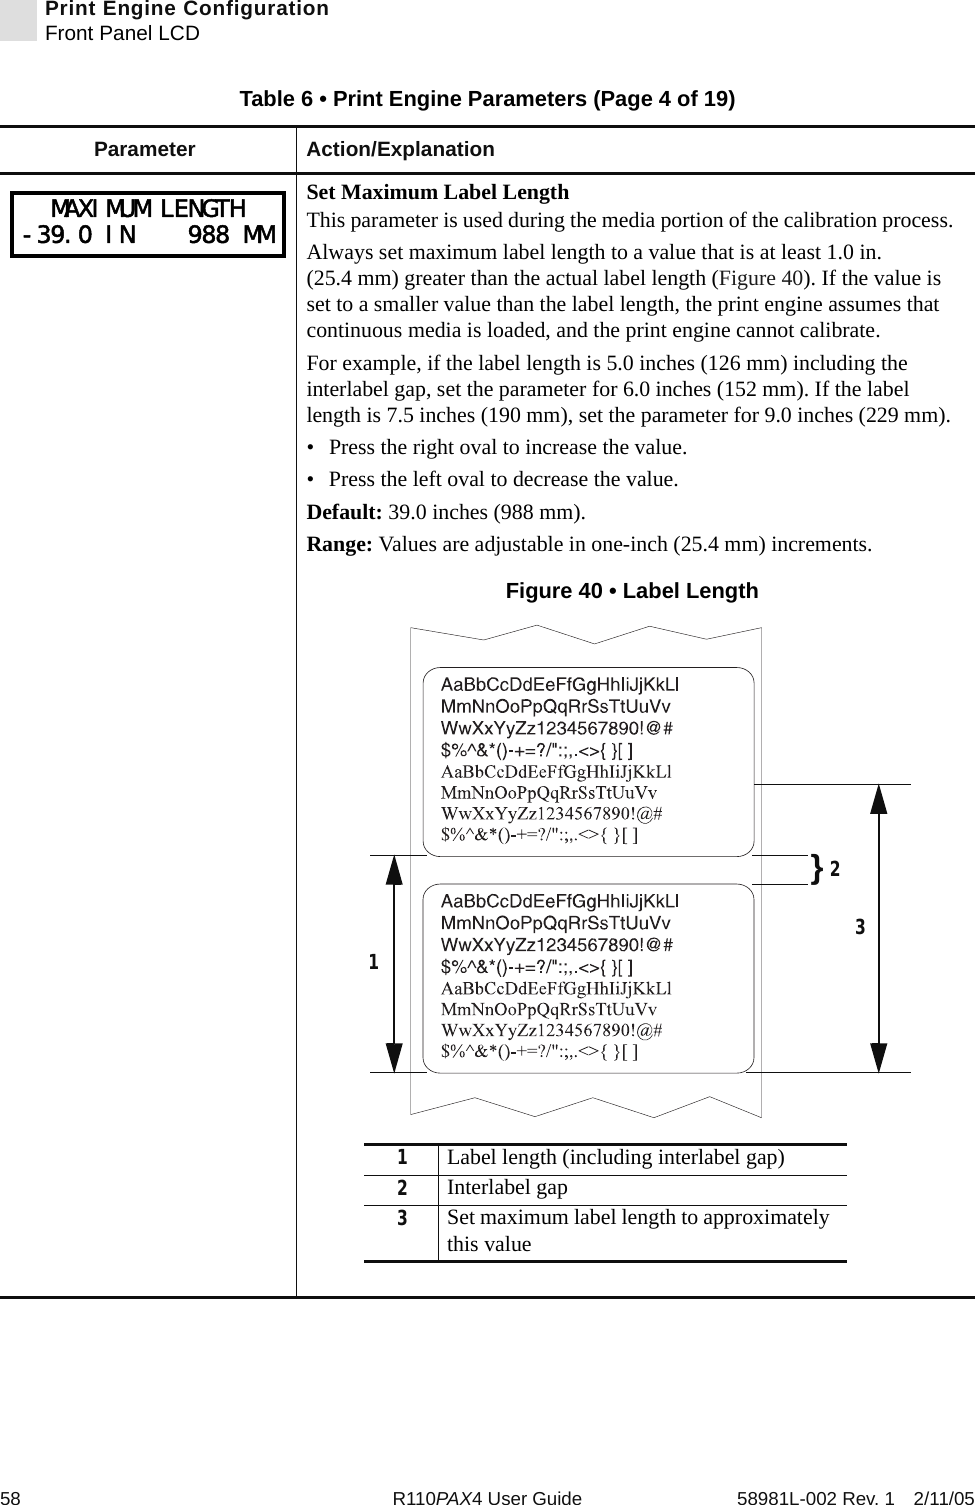 58 R110PAX4 User Guide 58981L-002 Rev. 1 2/11/05Print Engine ConfigurationFront Panel LCDSet Maximum Label LengthThis parameter is used during the media portion of the calibration process. Always set maximum label length to a value that is at least 1.0 in. (25.4 mm) greater than the actual label length (Figure 40). If the value is set to a smaller value than the label length, the print engine assumes that continuous media is loaded, and the print engine cannot calibrate.For example, if the label length is 5.0 inches (126 mm) including the interlabel gap, set the parameter for 6.0 inches (152 mm). If the label length is 7.5 inches (190 mm), set the parameter for 9.0 inches (229 mm).• Press the right oval to increase the value. • Press the left oval to decrease the value.Default: 39.0 inches (988 mm). Range: Values are adjustable in one-inch (25.4 mm) increments.Figure 40 • Label LengthTable 6 • Print Engine Parameters (Page 4 of 19)Parameter Action/ExplanationMAXIMUM LENGTH-39.0 IN    988 MM}21Label length (including interlabel gap)2Interlabel gap3Set maximum label length to approximately this value13